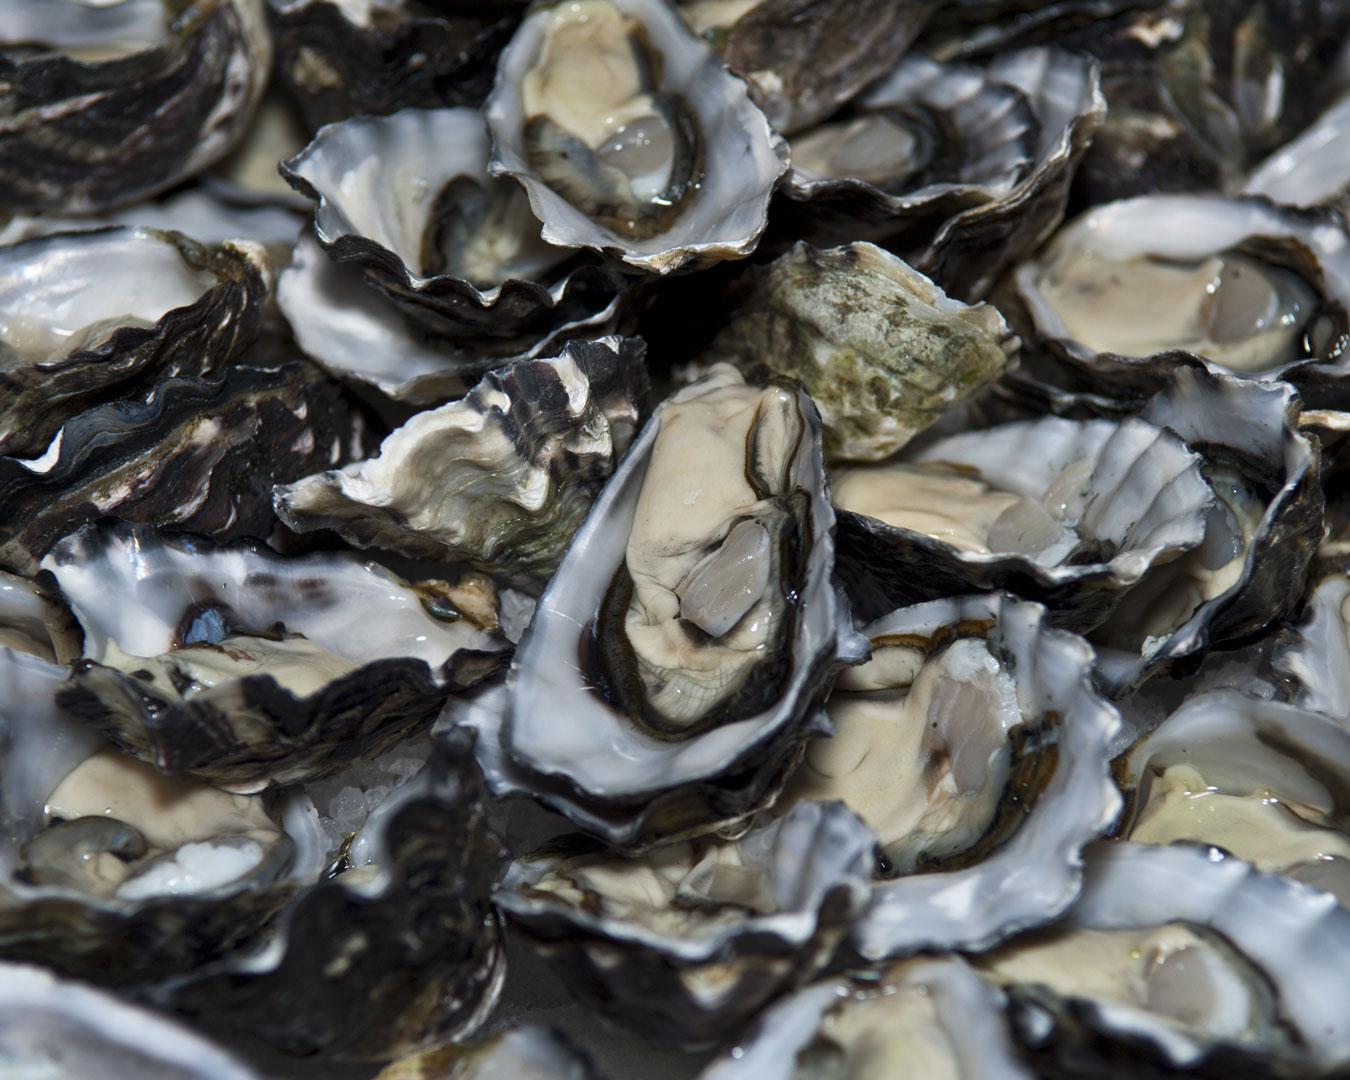 Shuck Your Way Around NSW With This Guide To The State's Best Oyster